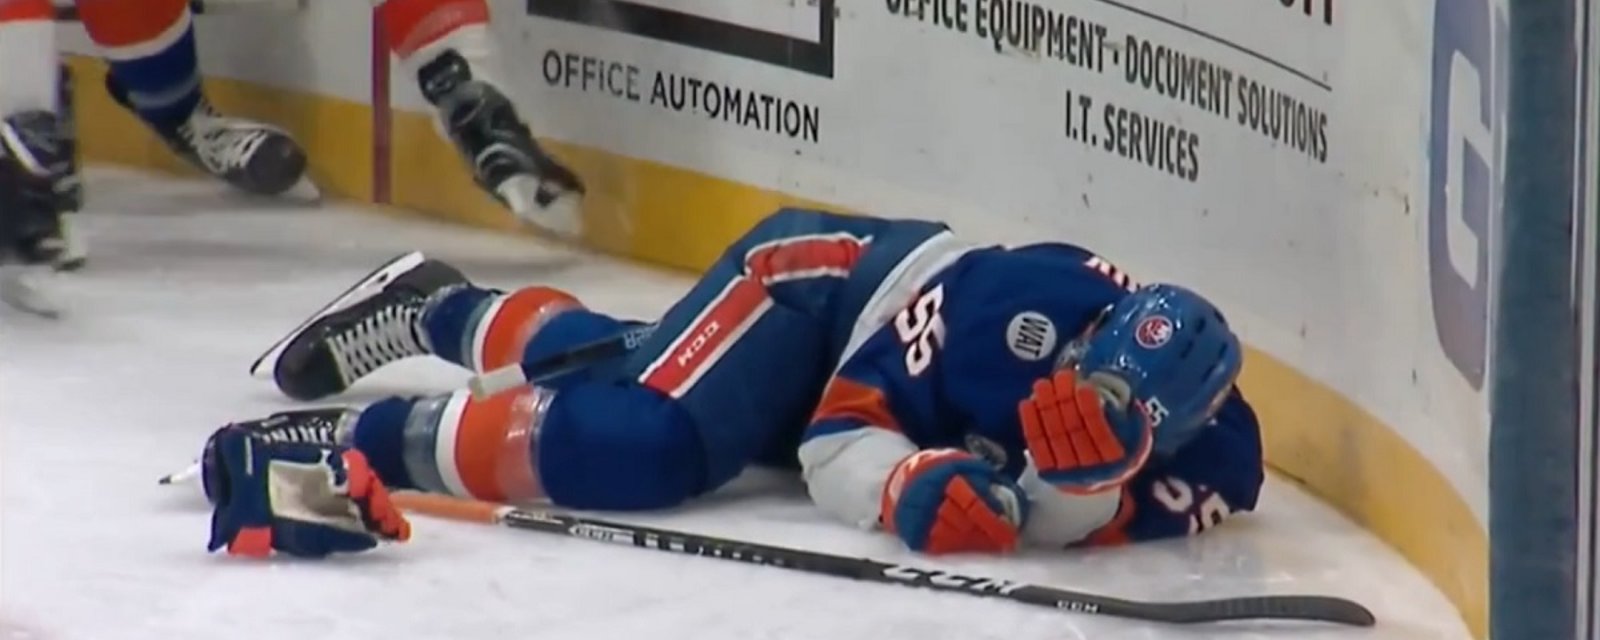 Boychuk injured after a very controversial hit from Voracek.